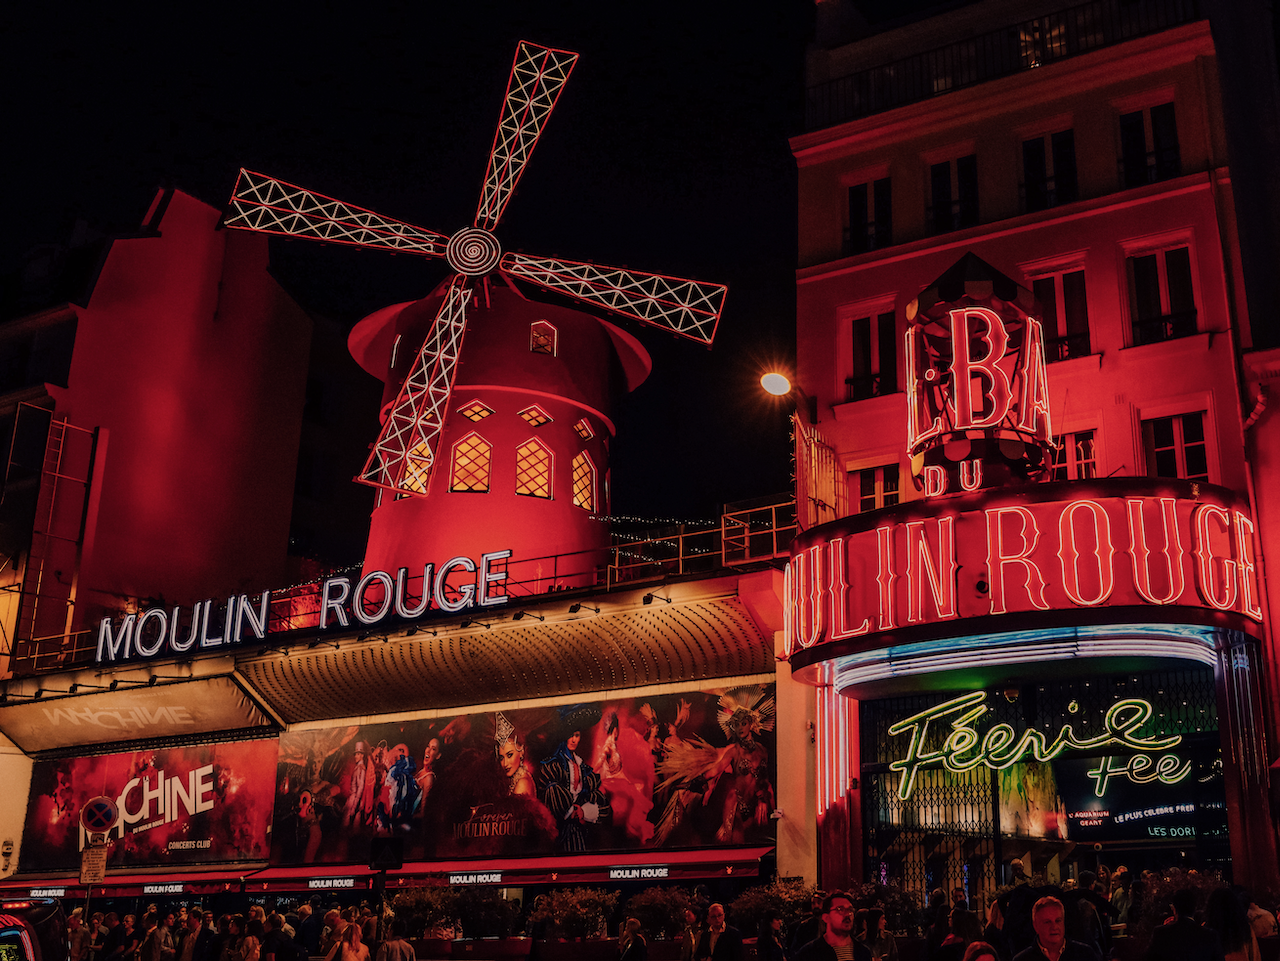 The stunning facade of the Moulin Rouge lit up at night - Paris - France